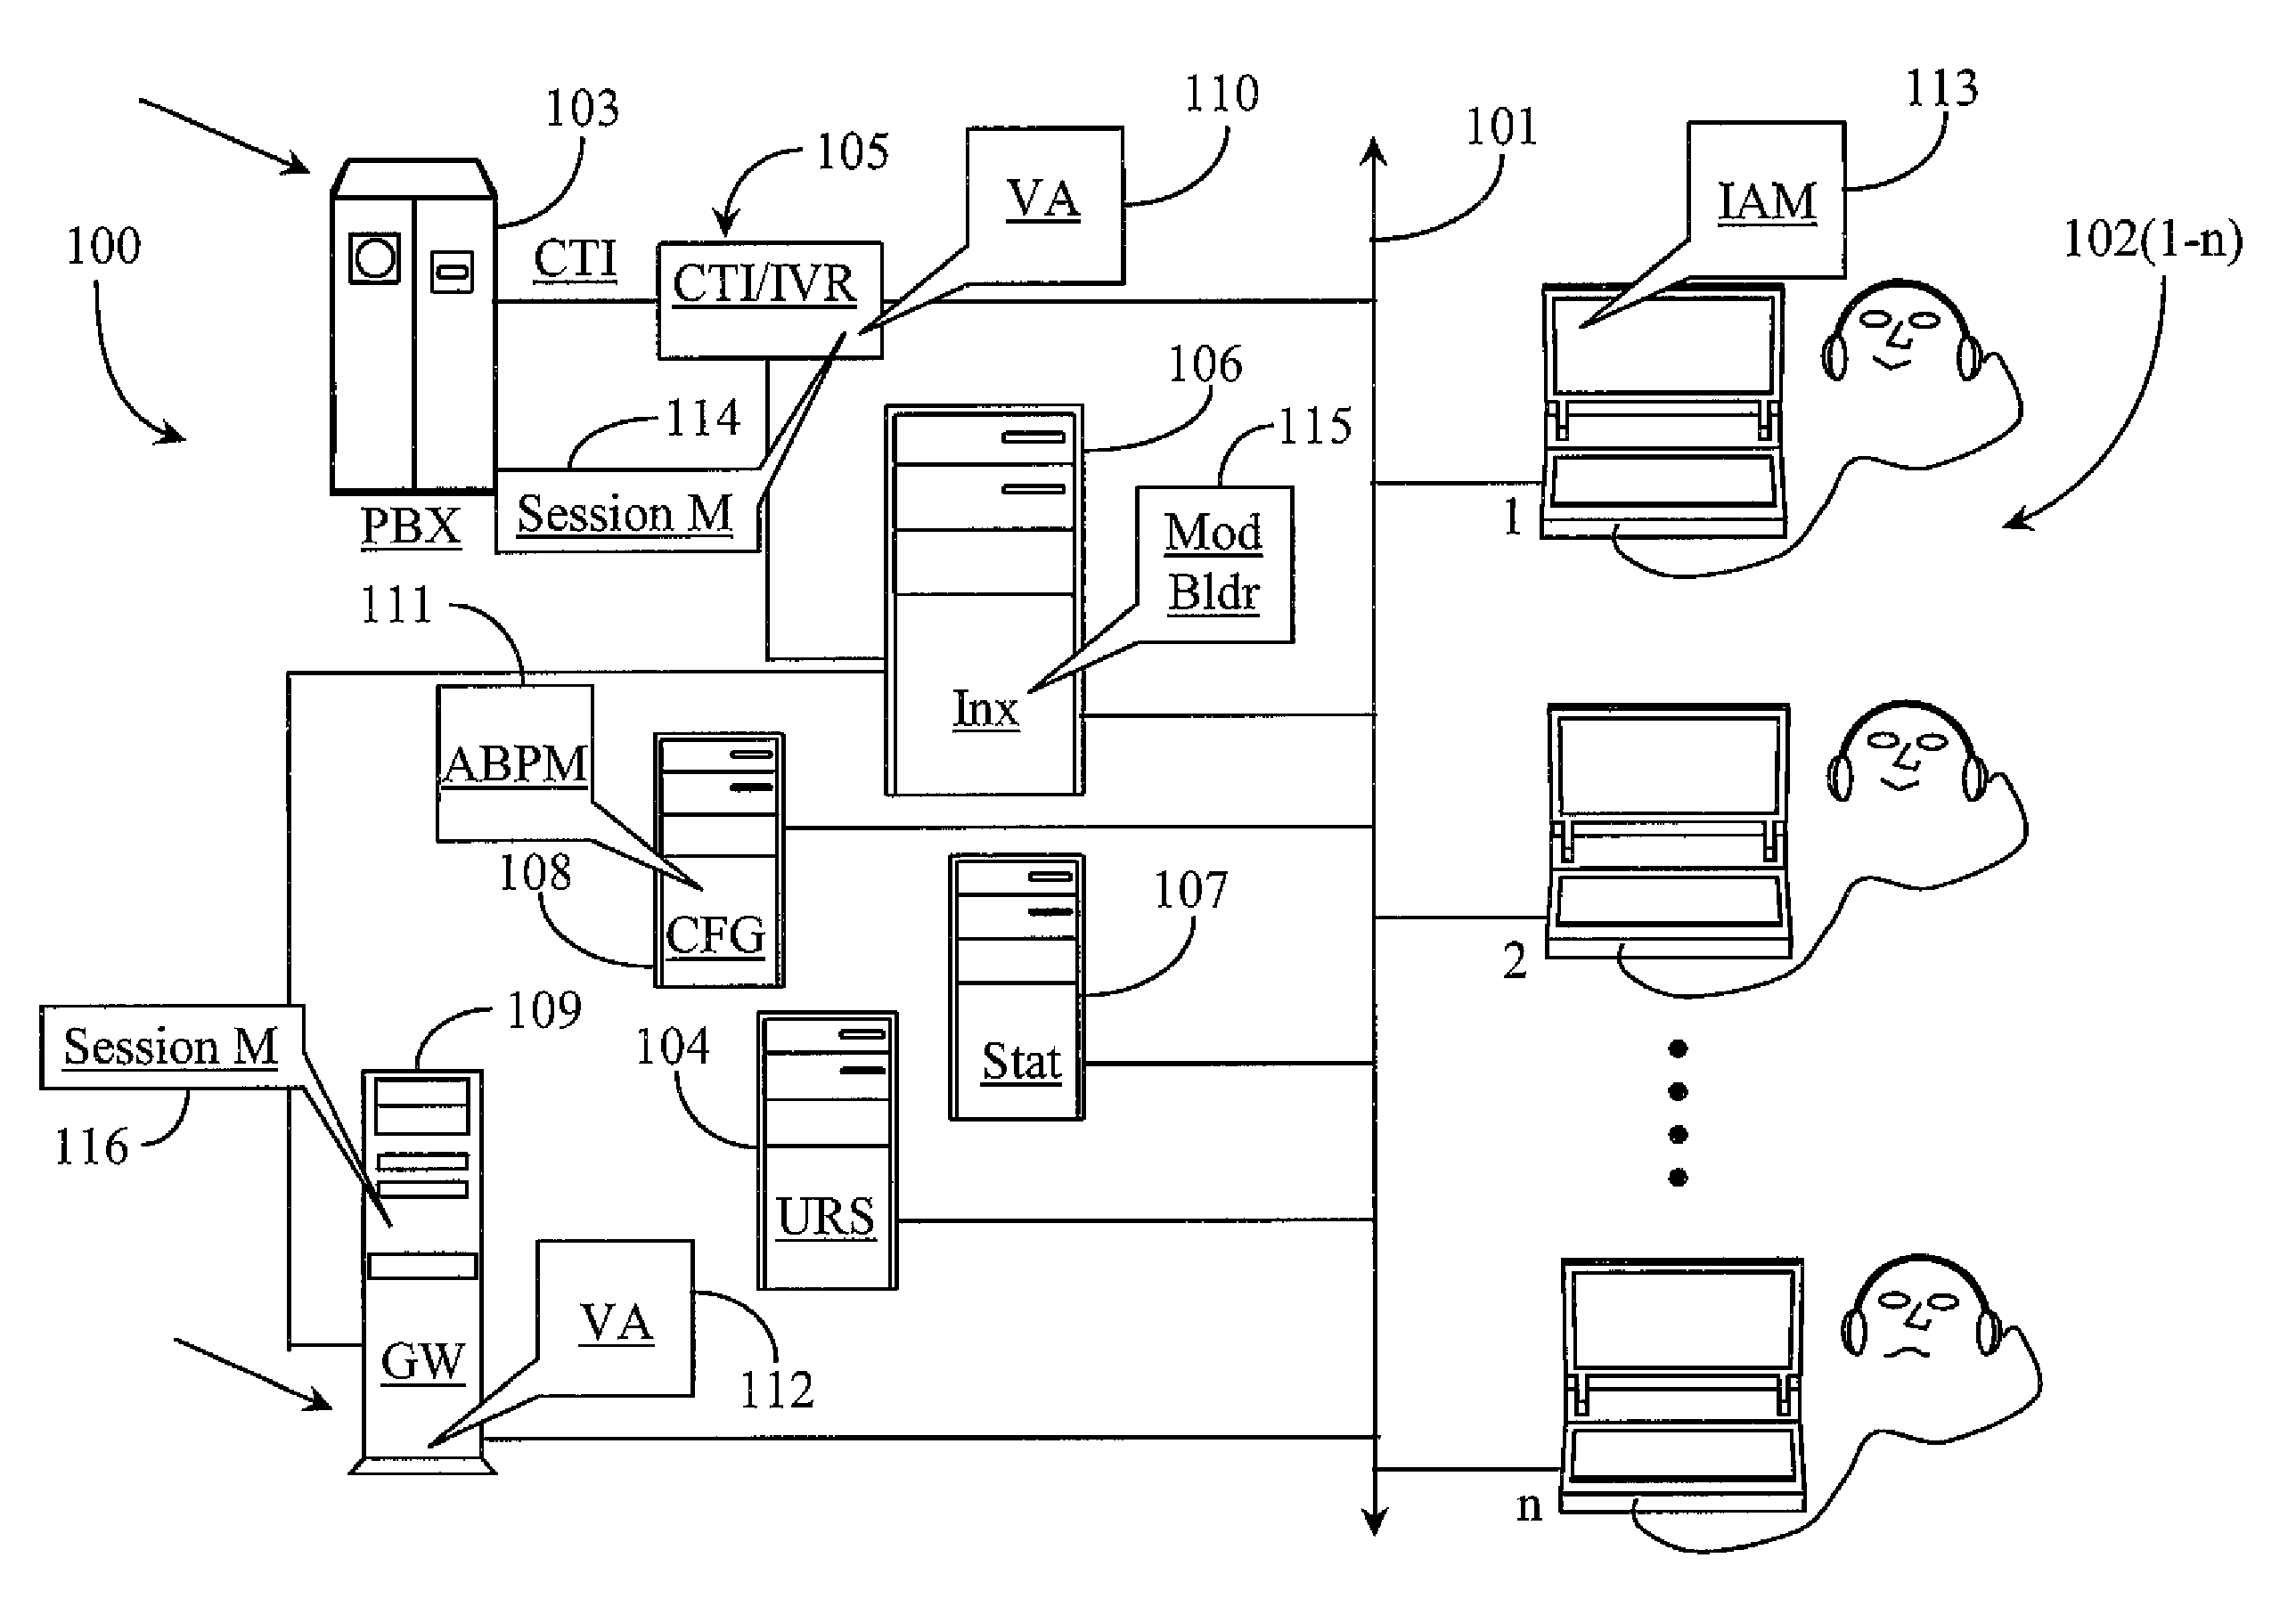 System for routing interactions using bio-performance attributes of persons as dynamic input